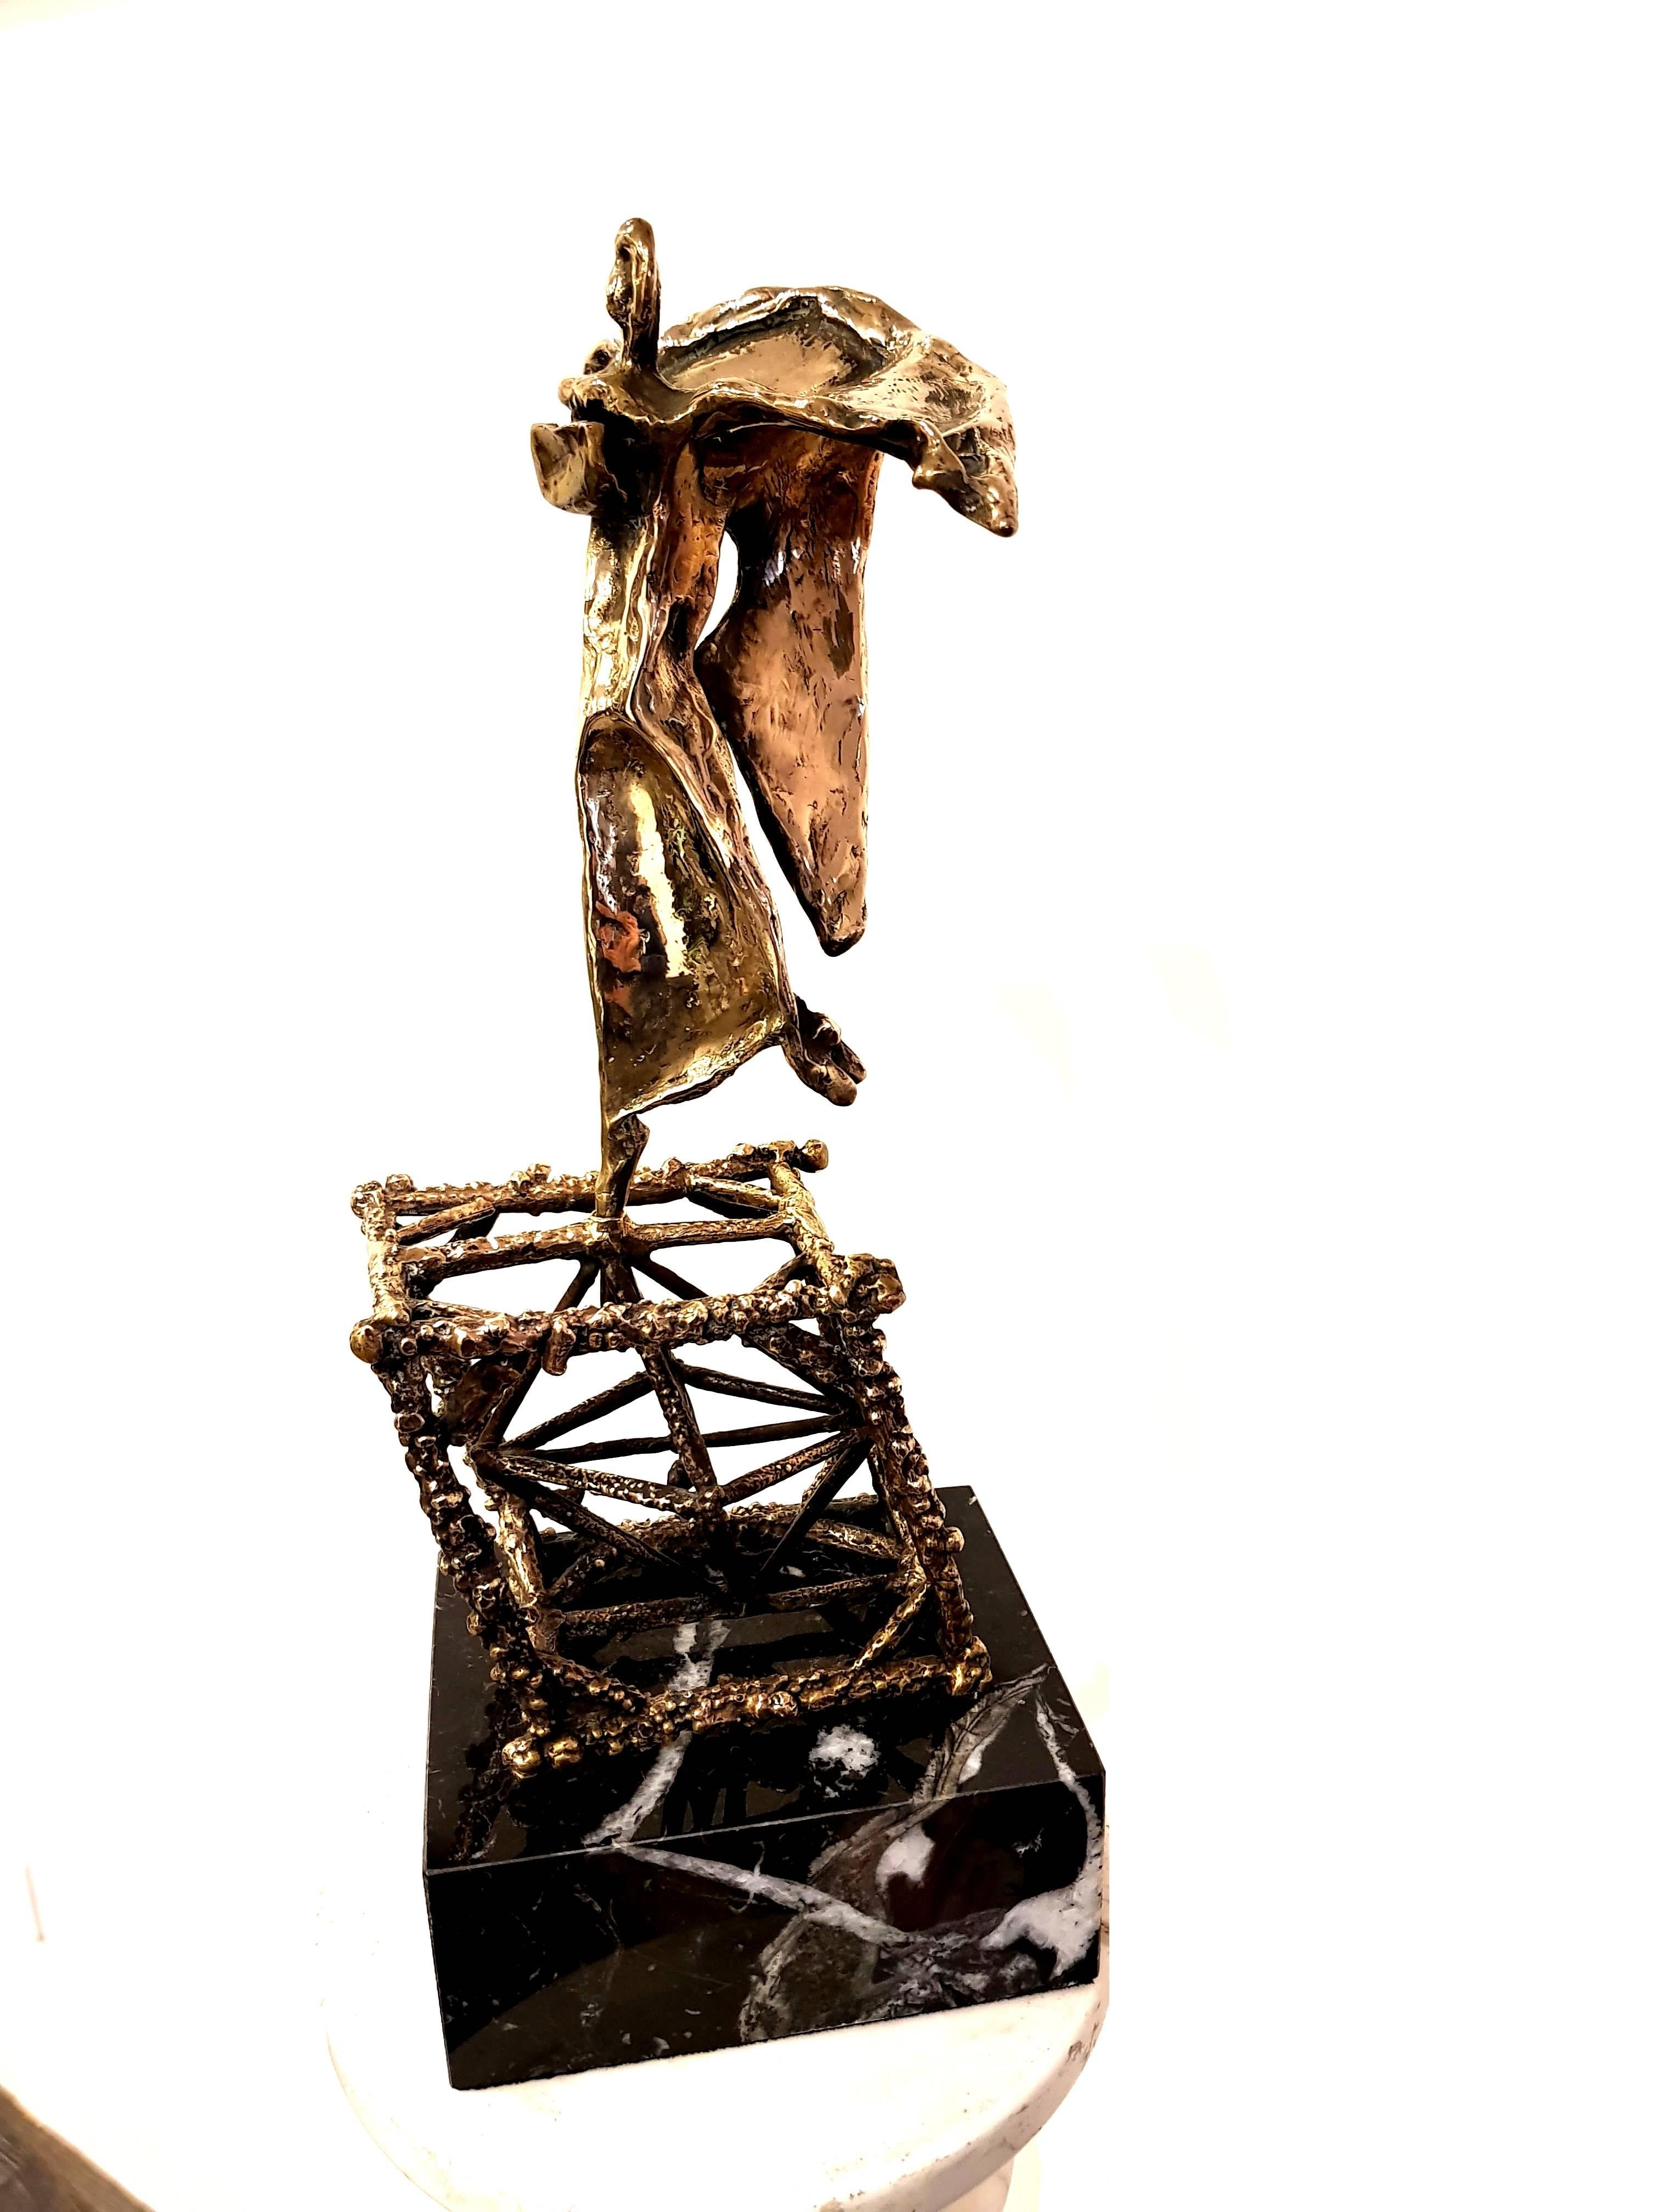 Salvador Dali - Original Bronze Sculpture
Title: Flying
Dimensions: 40 x 20 x 15 cm
Signed
Edition: 324/650

Salvador Dali

Salvador Dali was born as the son of a prestigious notary in the small town of Figueras in Northern Spain. His talent as an